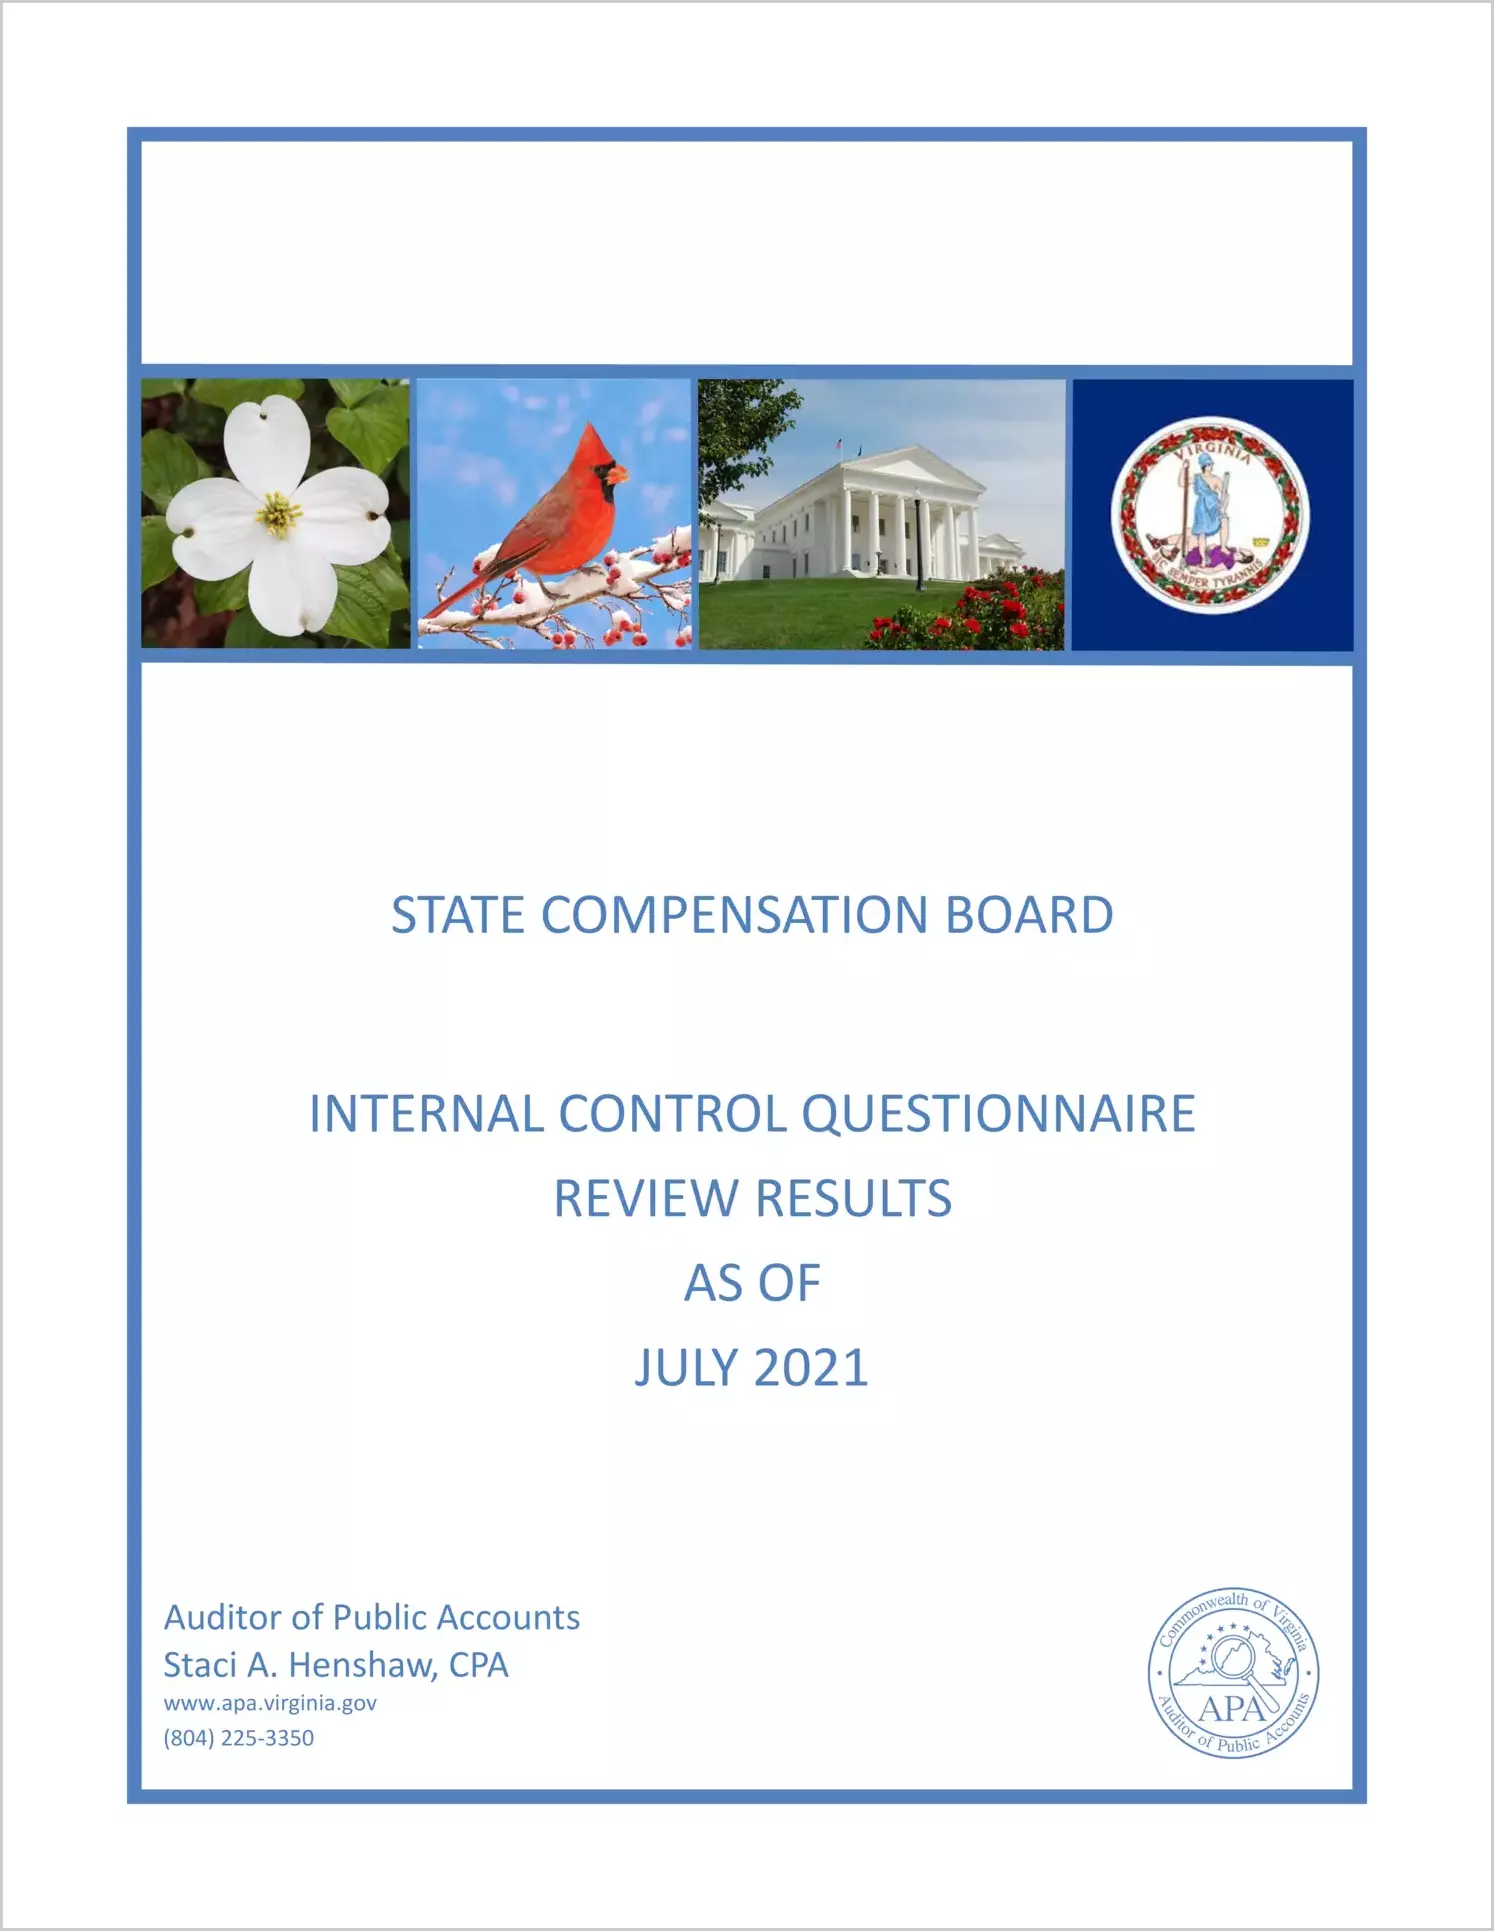 State Compensation Board Internal Control Questionnaire Review Results as of July 2021